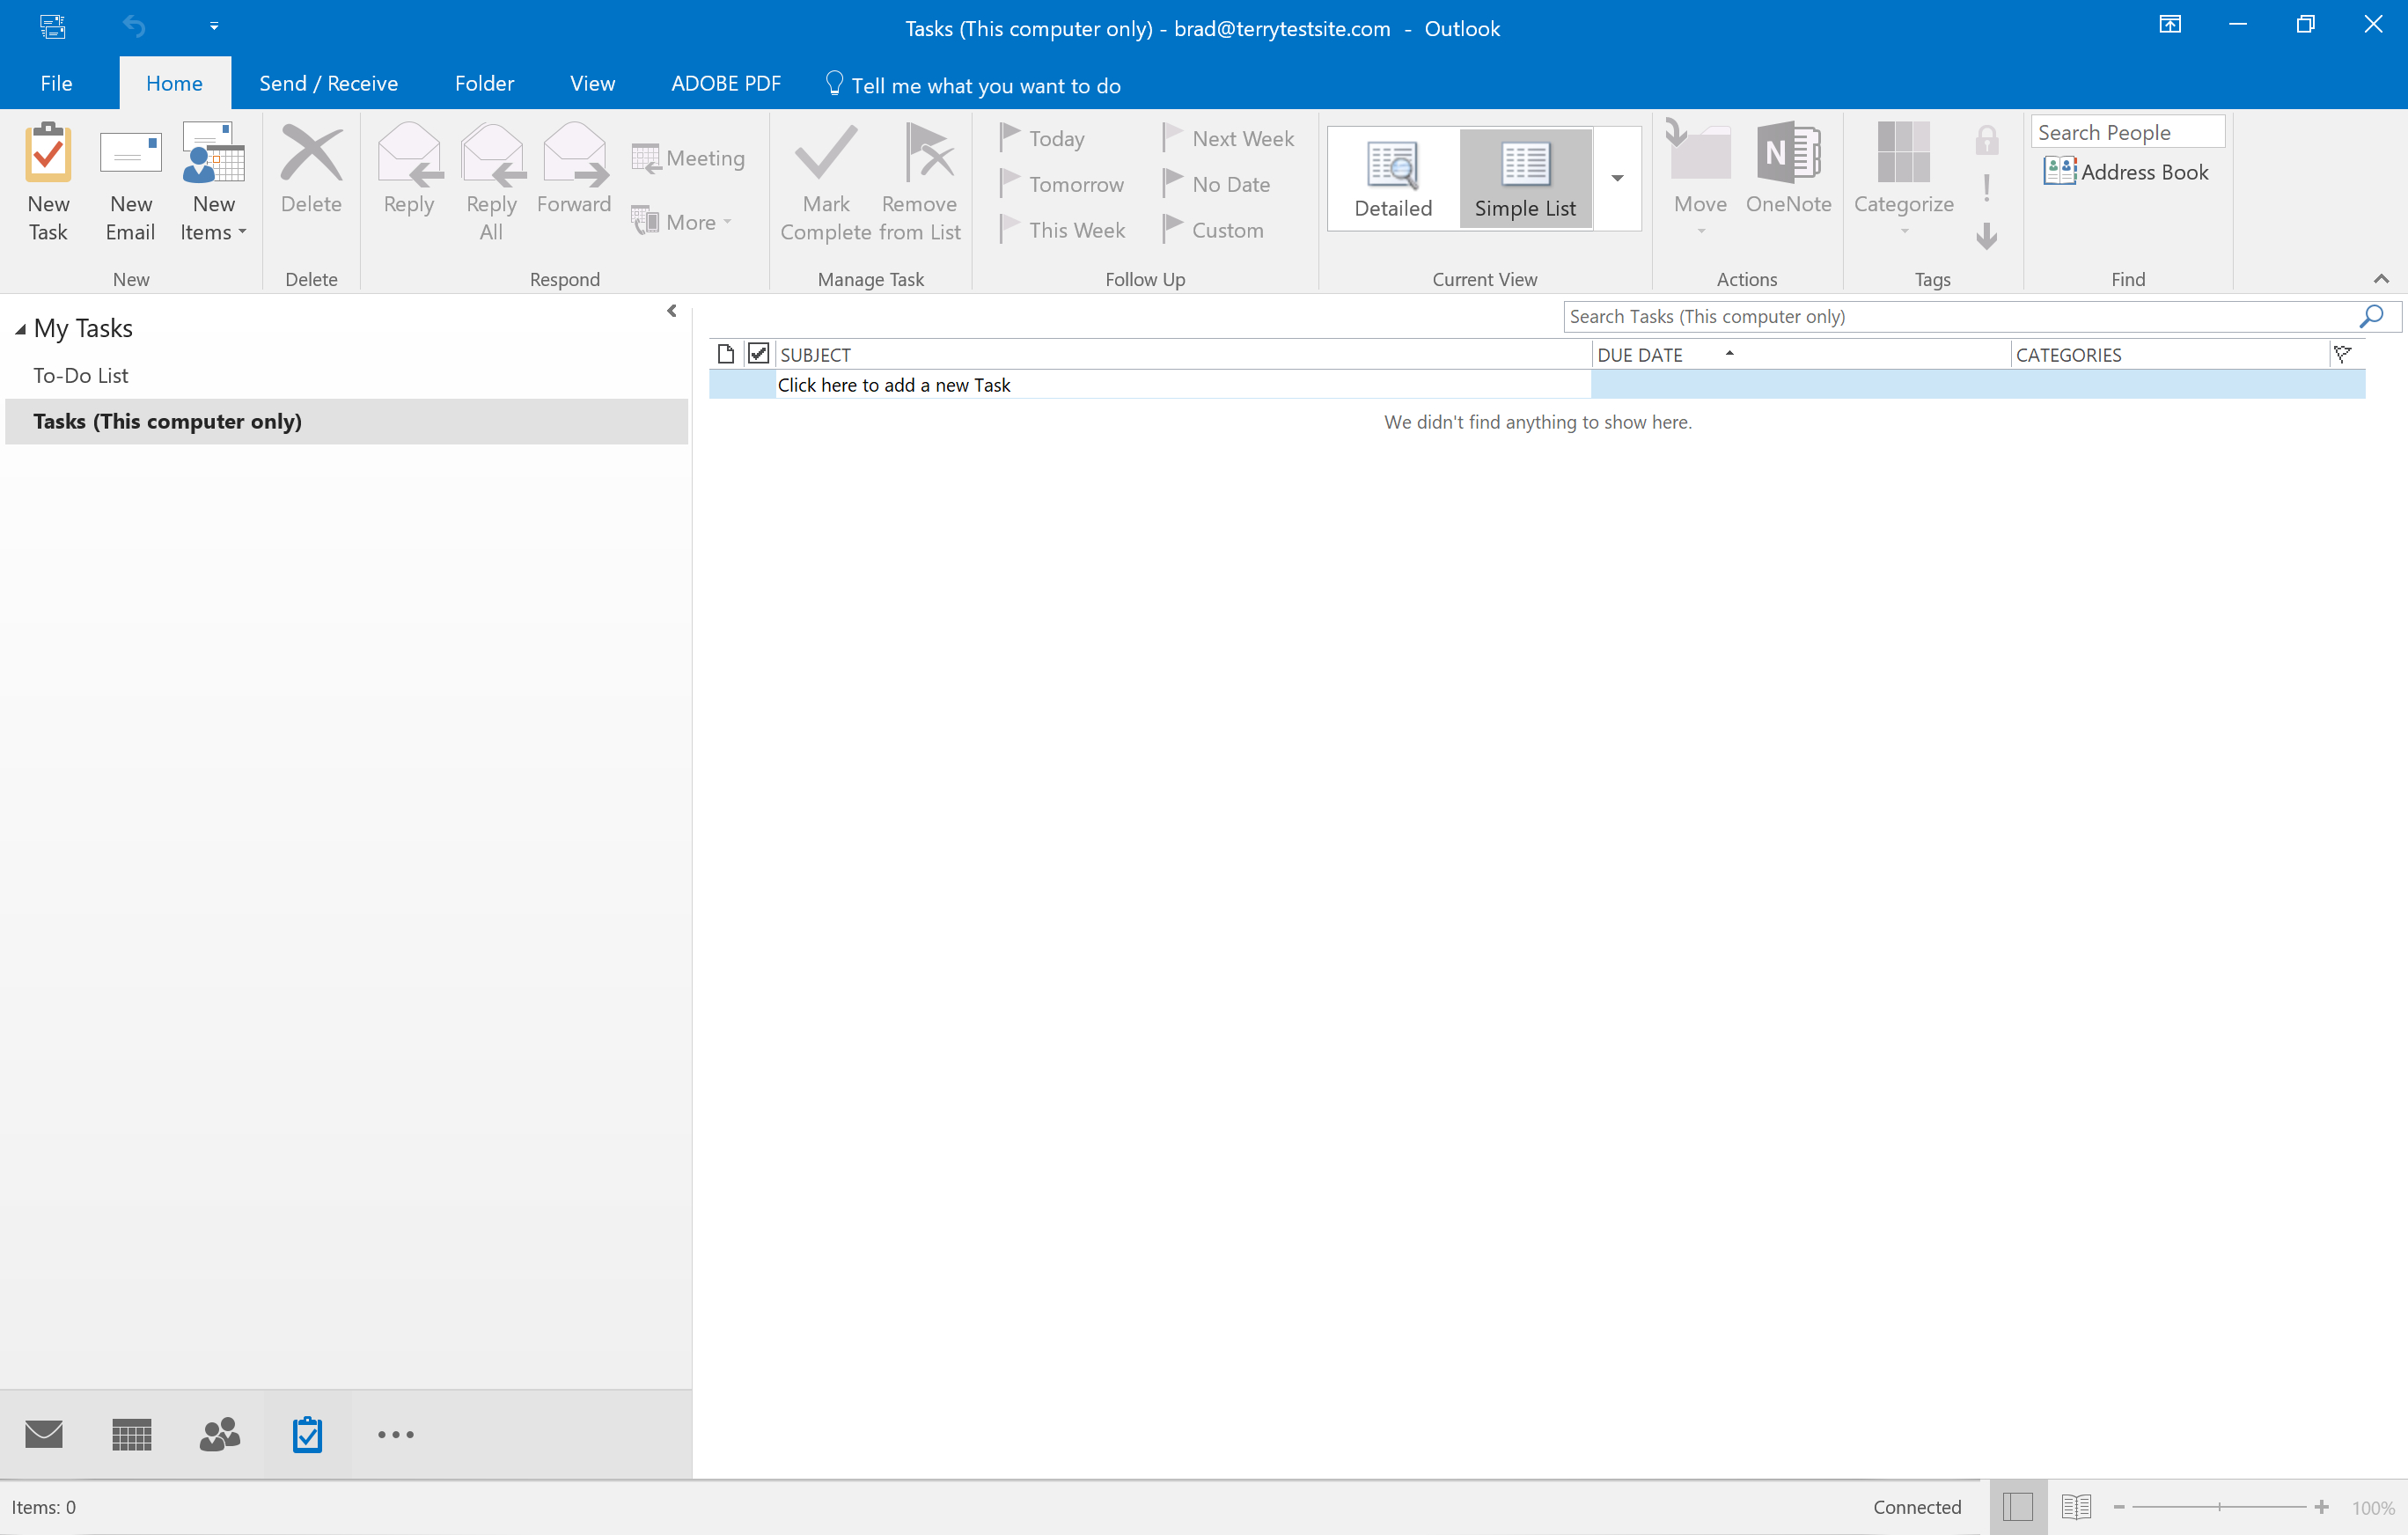 How To View Tasks And To-Do Lists In Outlook 2016 - Hostpapa